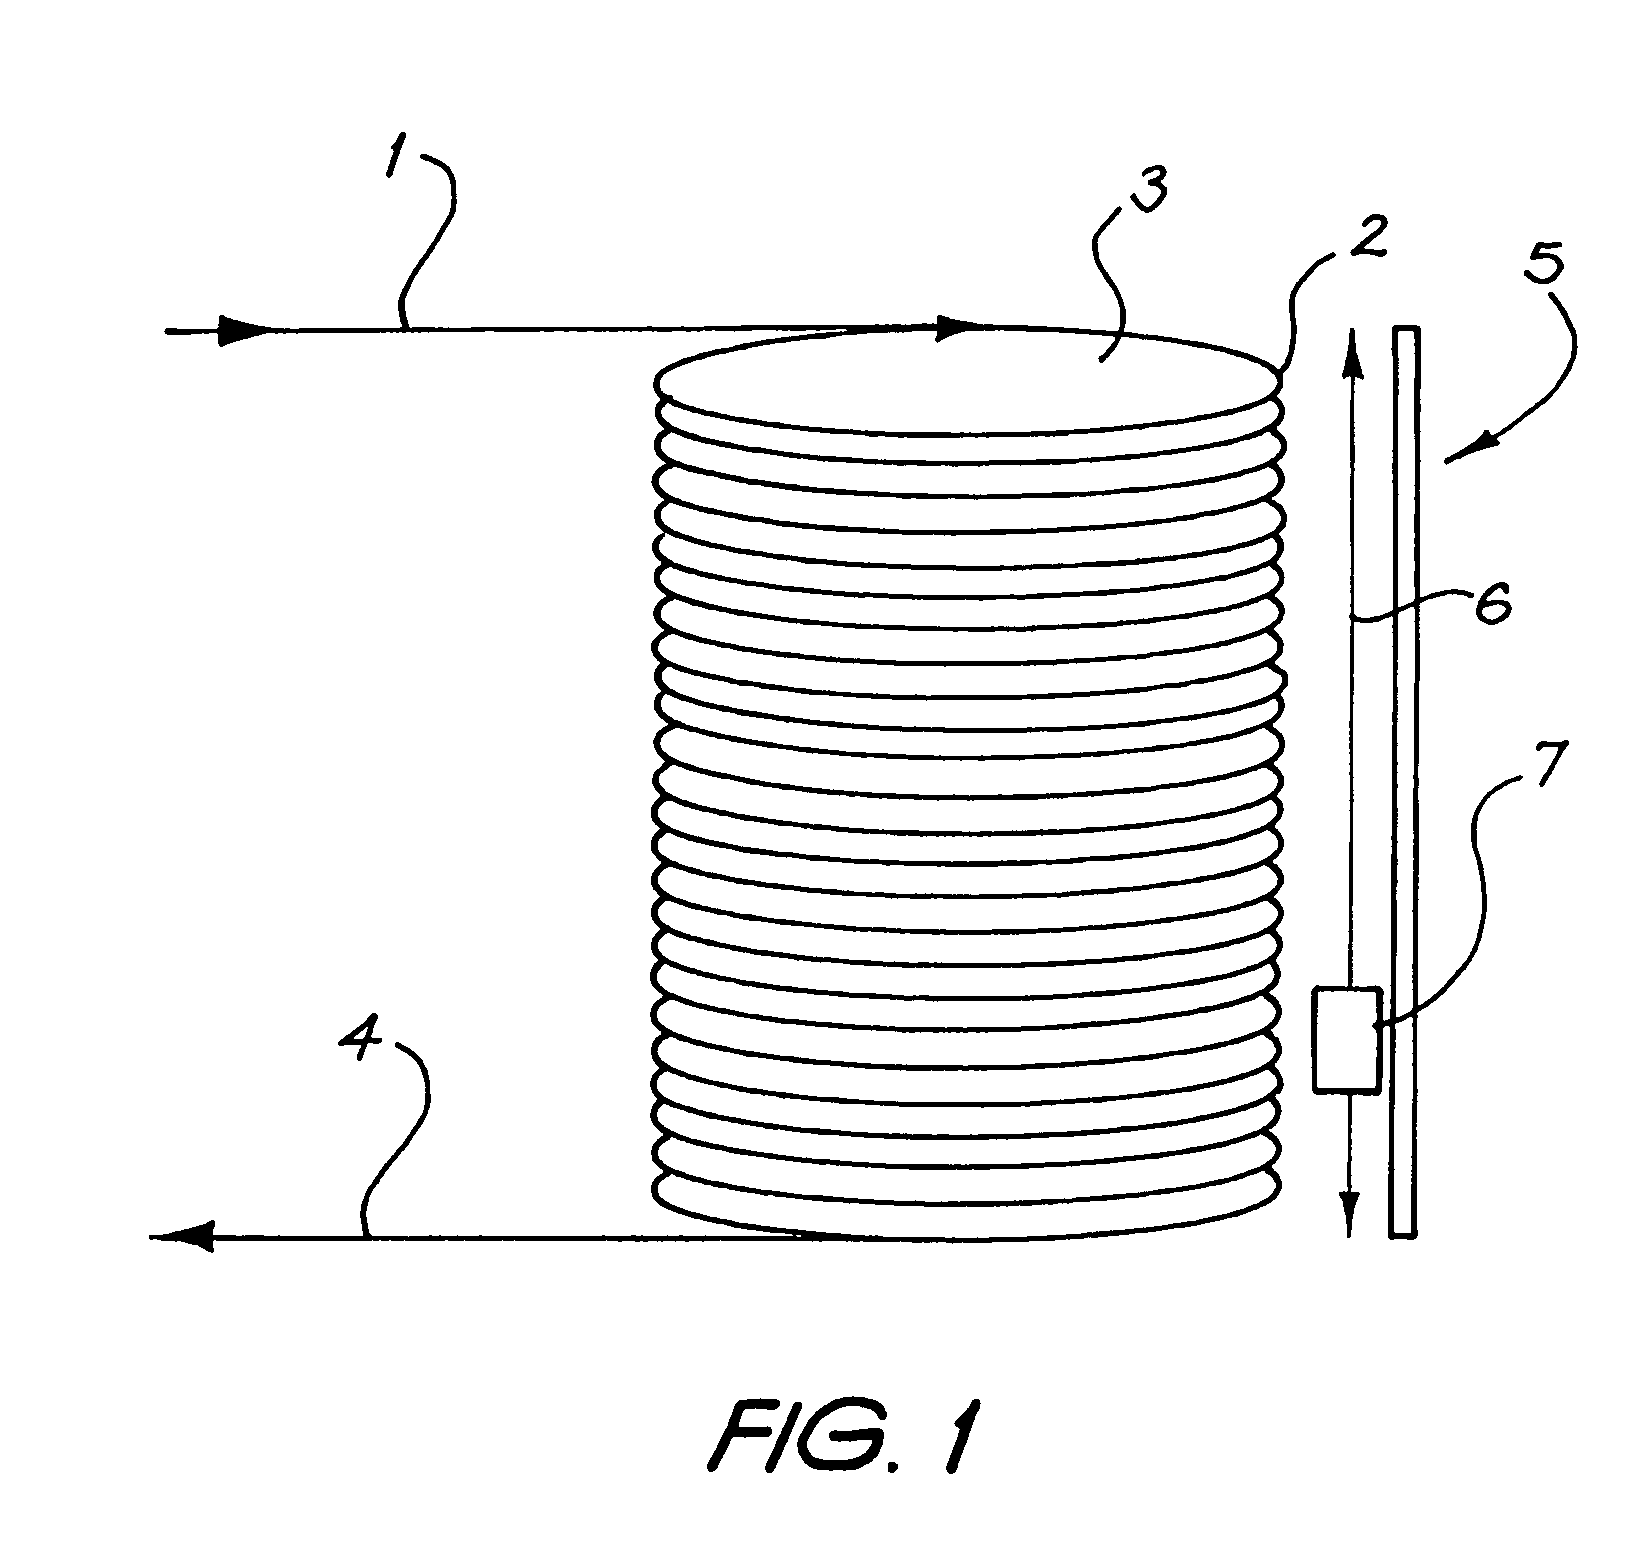 Continous flow thermal device